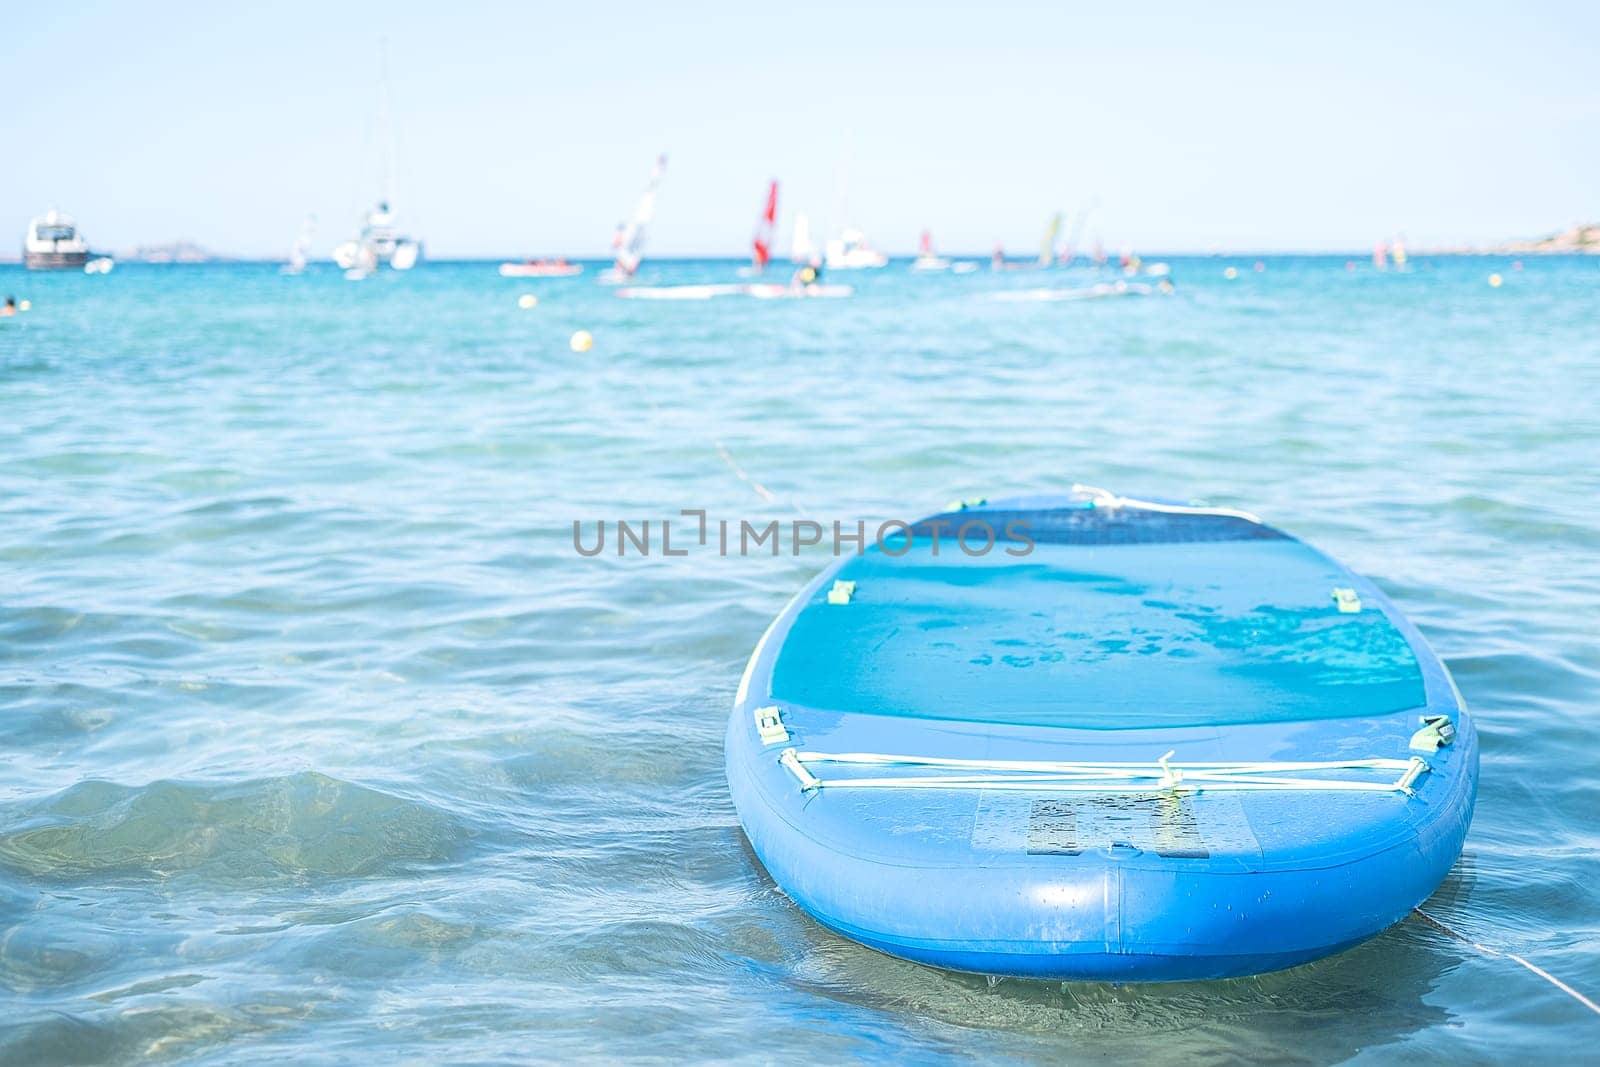 Lonely sup board on the sea on floating sailboats background by Annavish